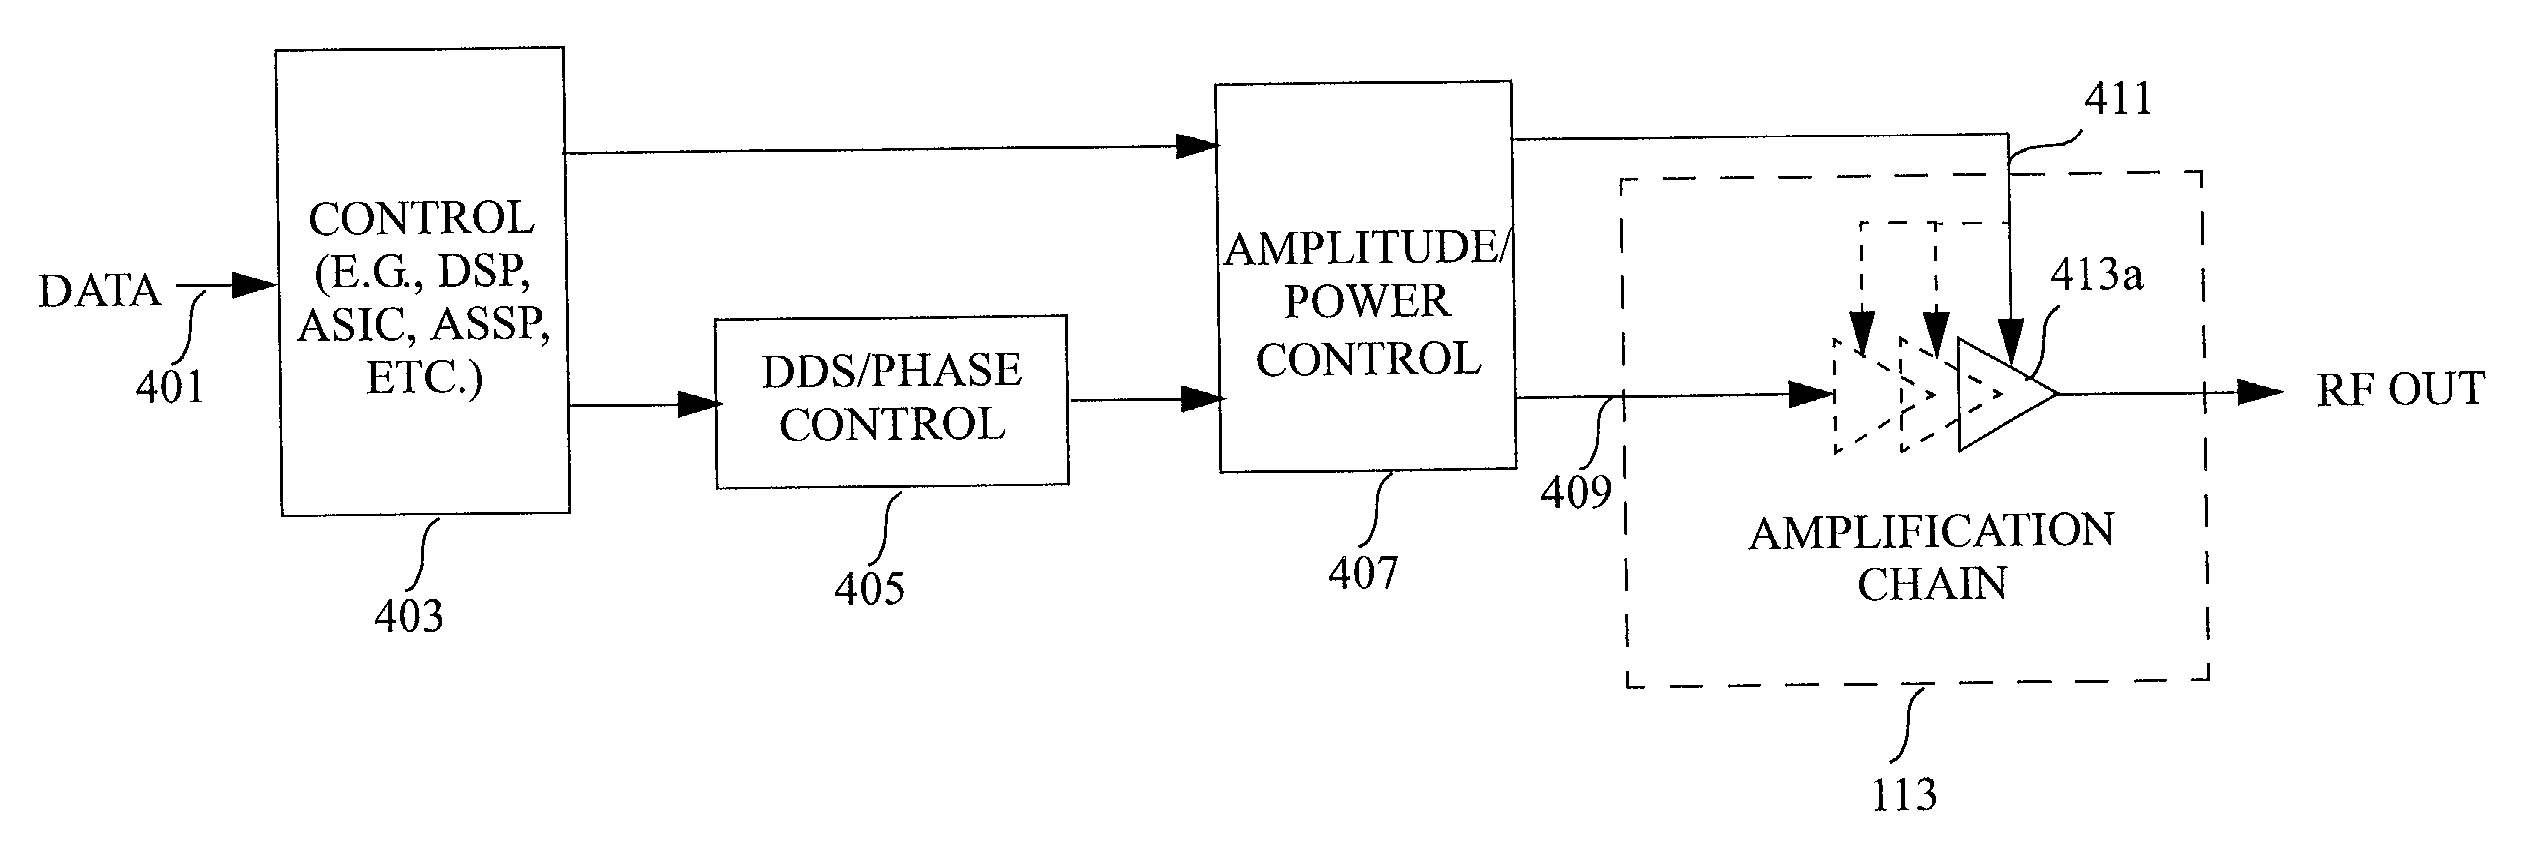 Communications signal amplifiers having independent power control and amplitude modulation